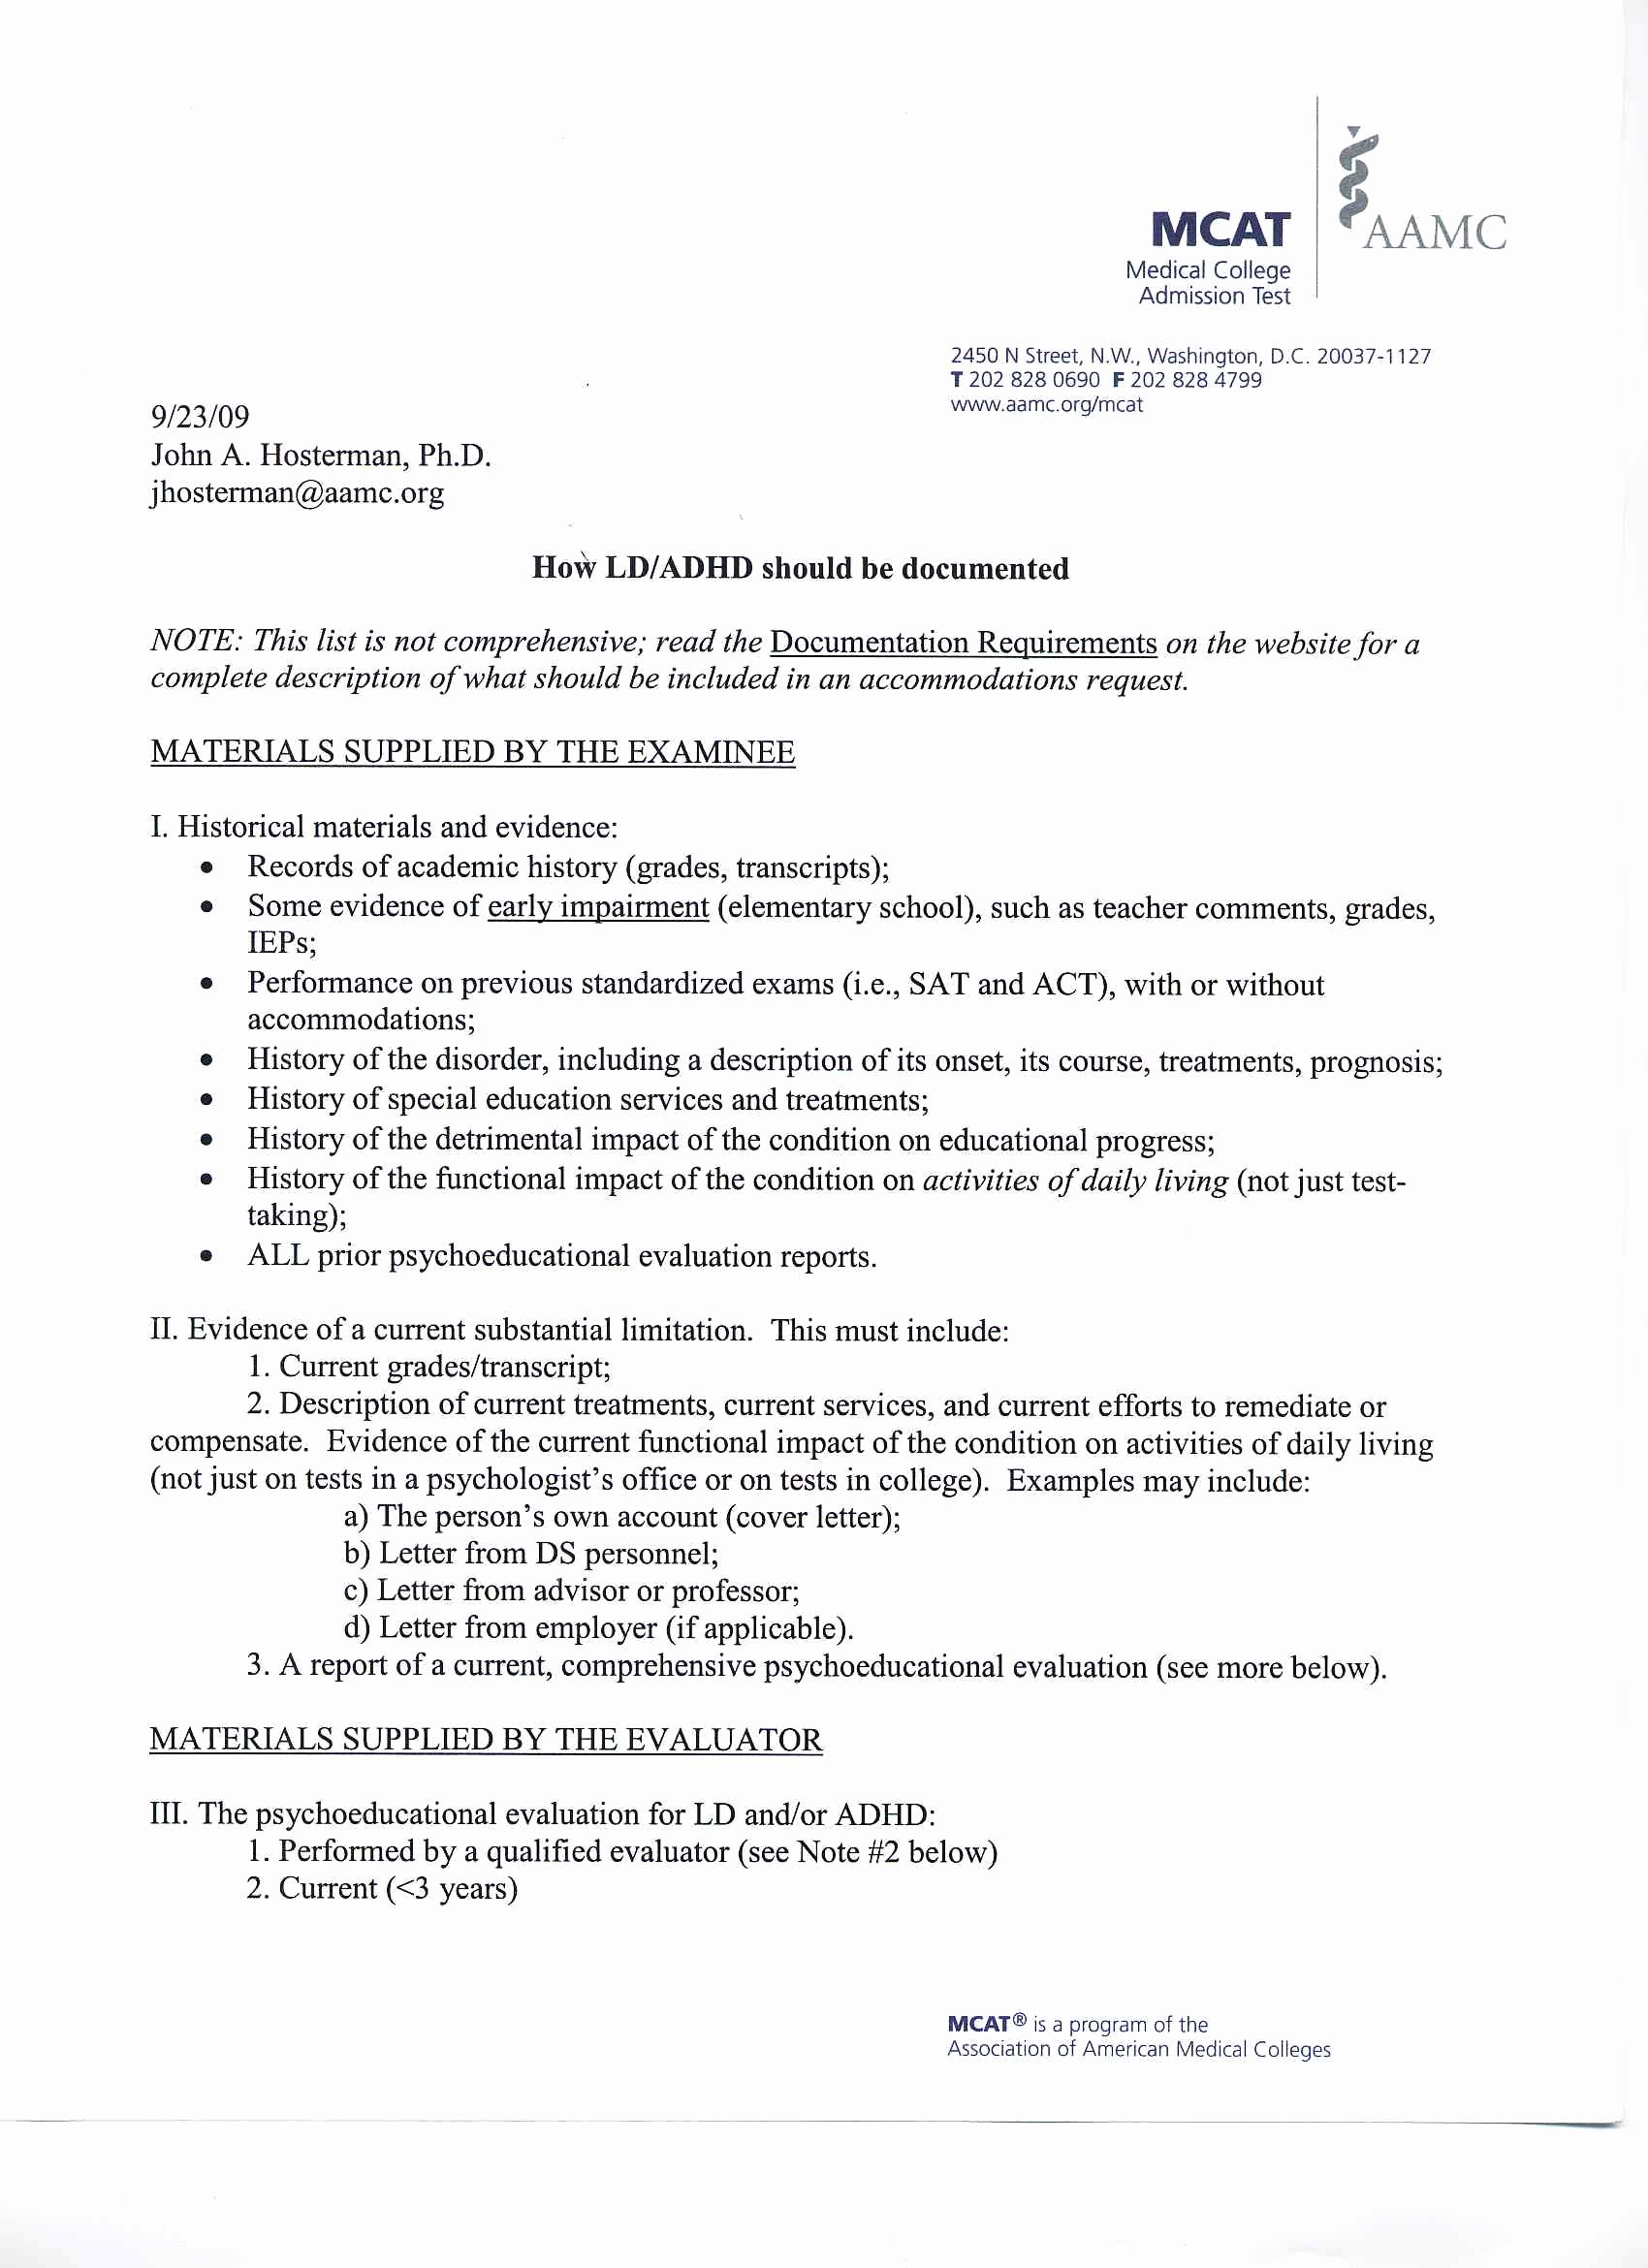 Amcas Letter Of Recommendation Guide New Lewis associates Medical School Advising